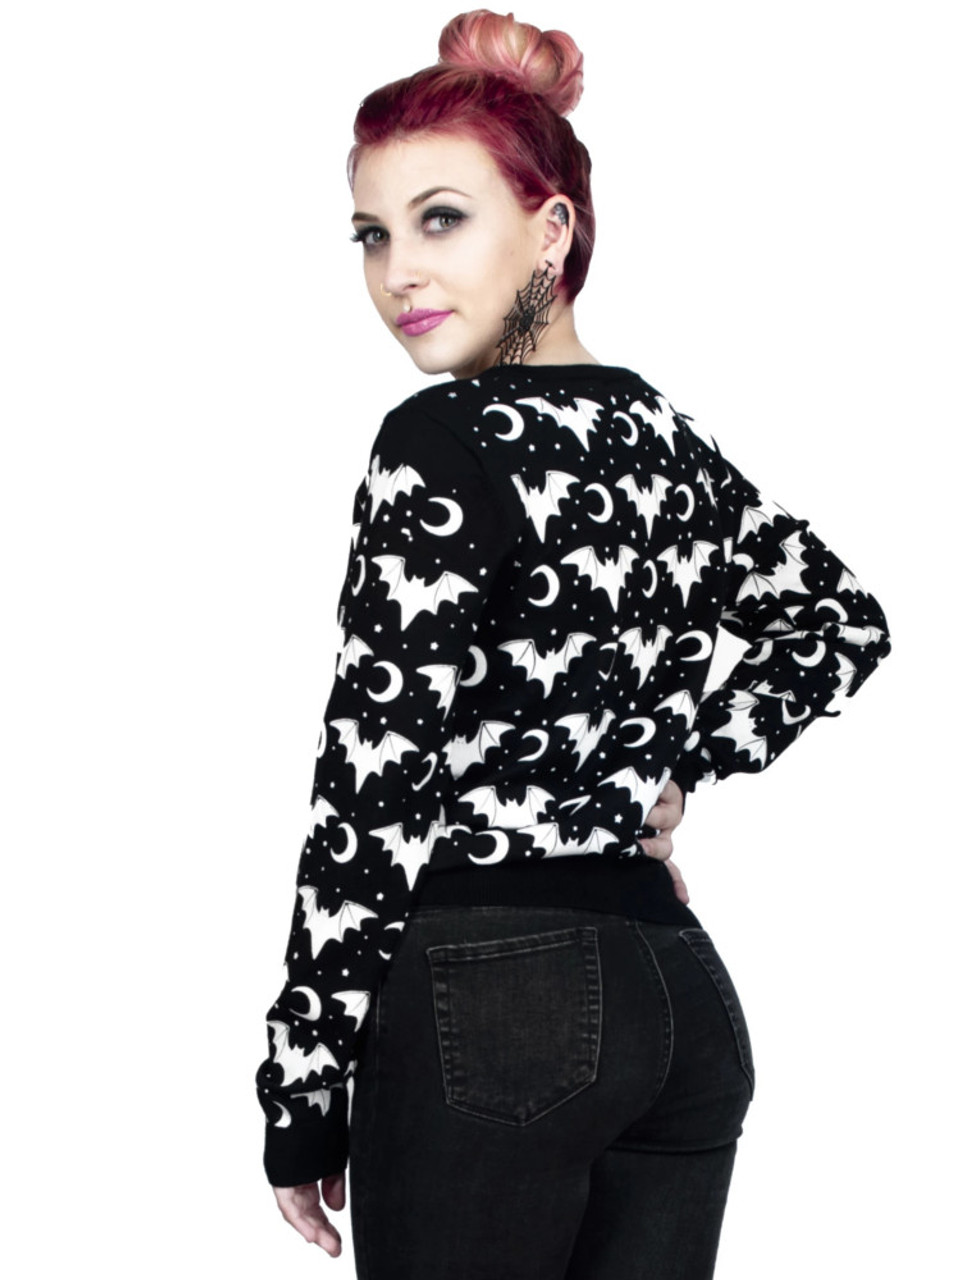 Too Fast Batty Bitch Bat Lady Pullover Sweater - Suicide Glam Australia